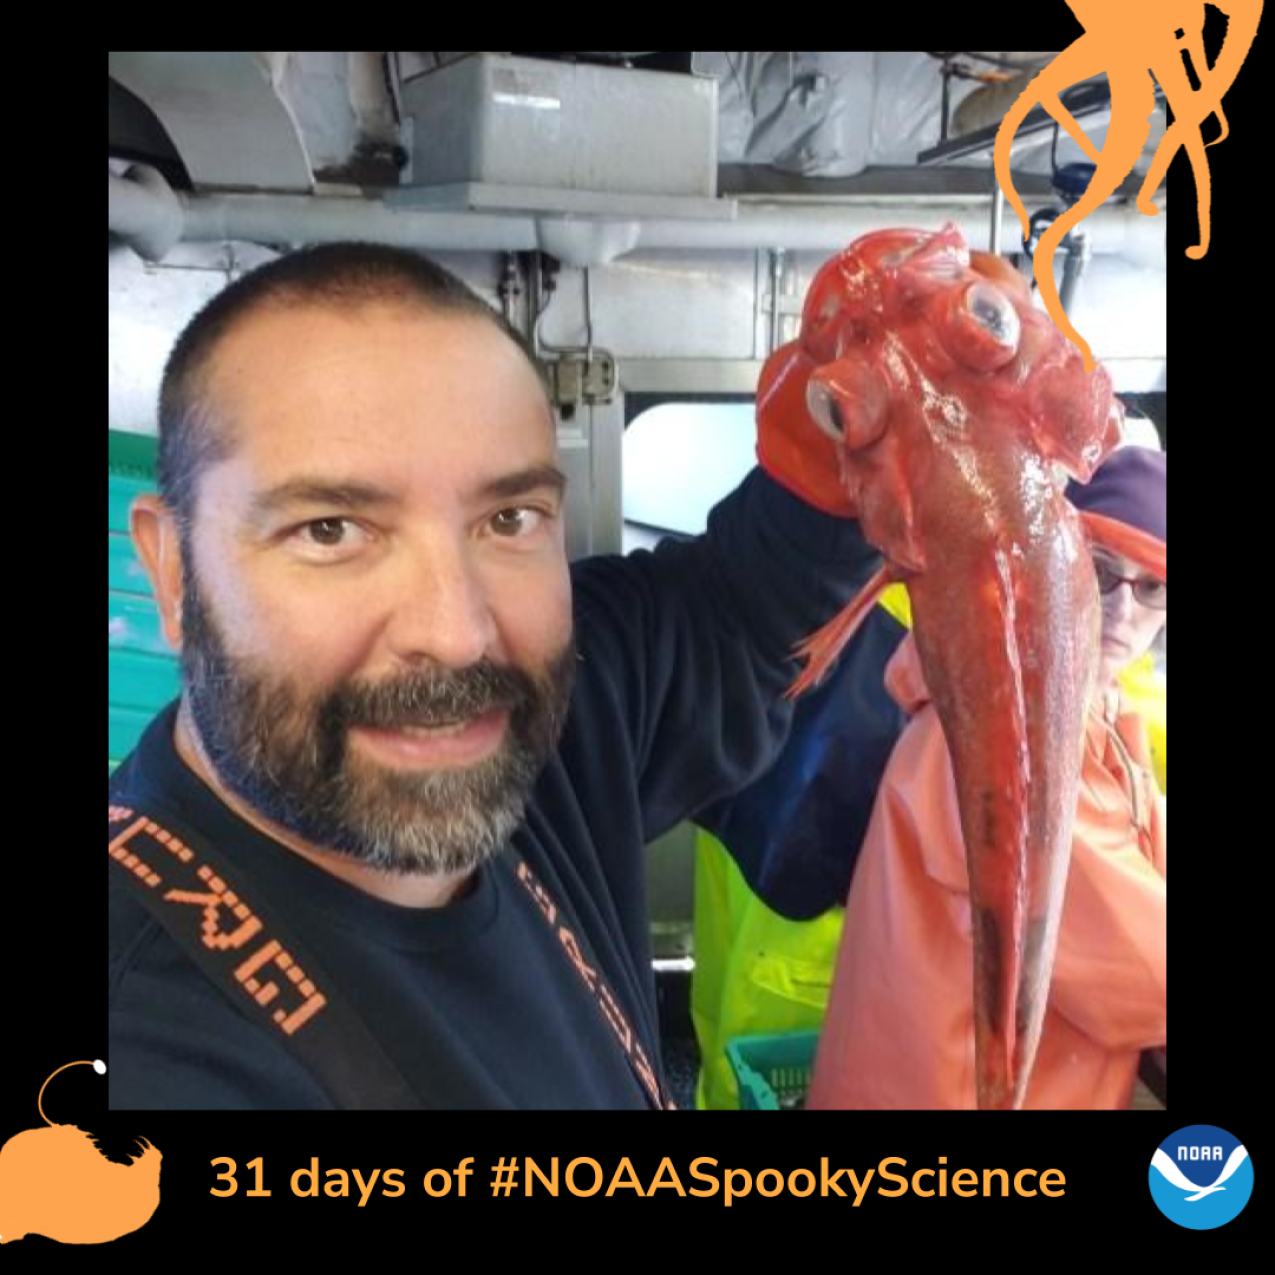 Phil Moorhouse holds up a red Vermilion rockfish with bulging white eyes. Border of the photo is black with orange sea creature graphics of octopus tentacles and an anglerfish. Text: 31 days of #NOAASpookyScience